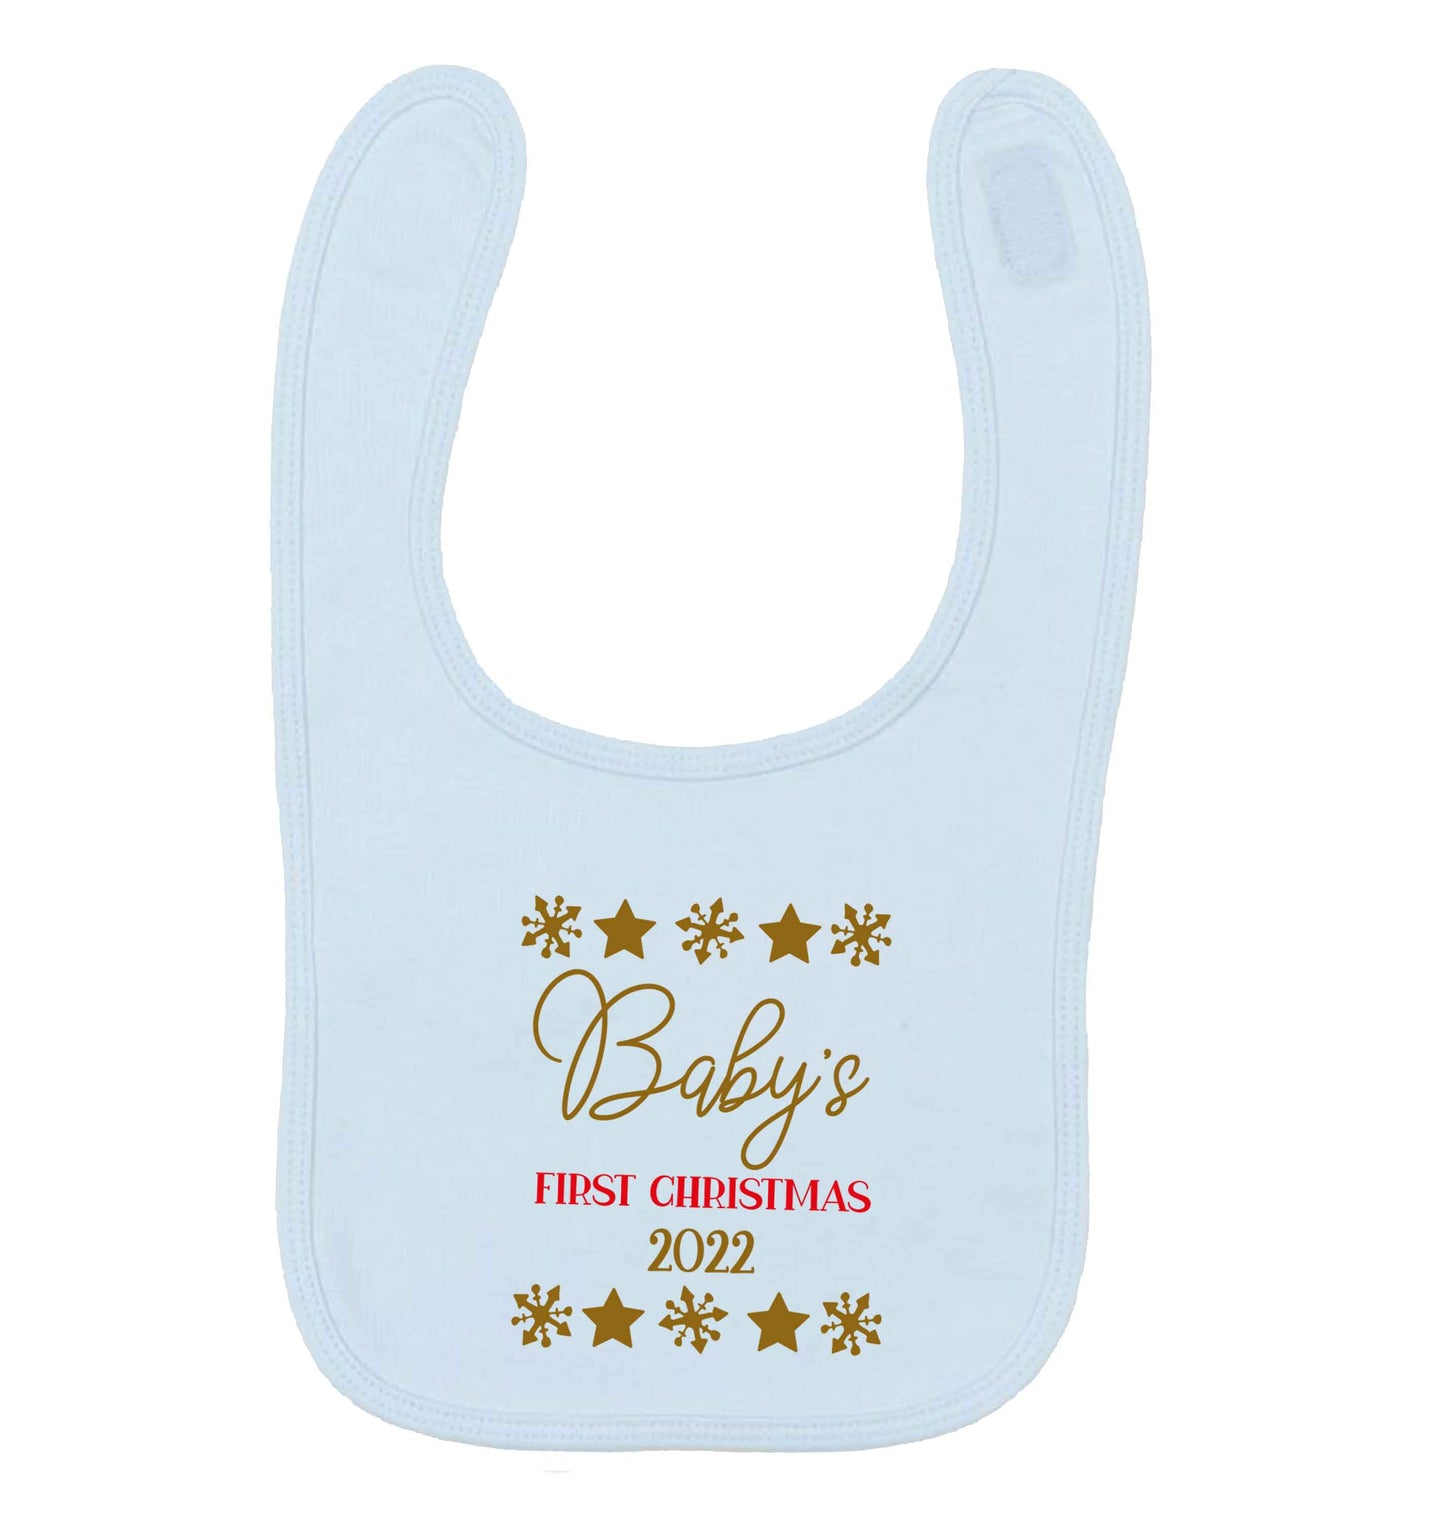 Baby's first Christmas pale blue baby bib